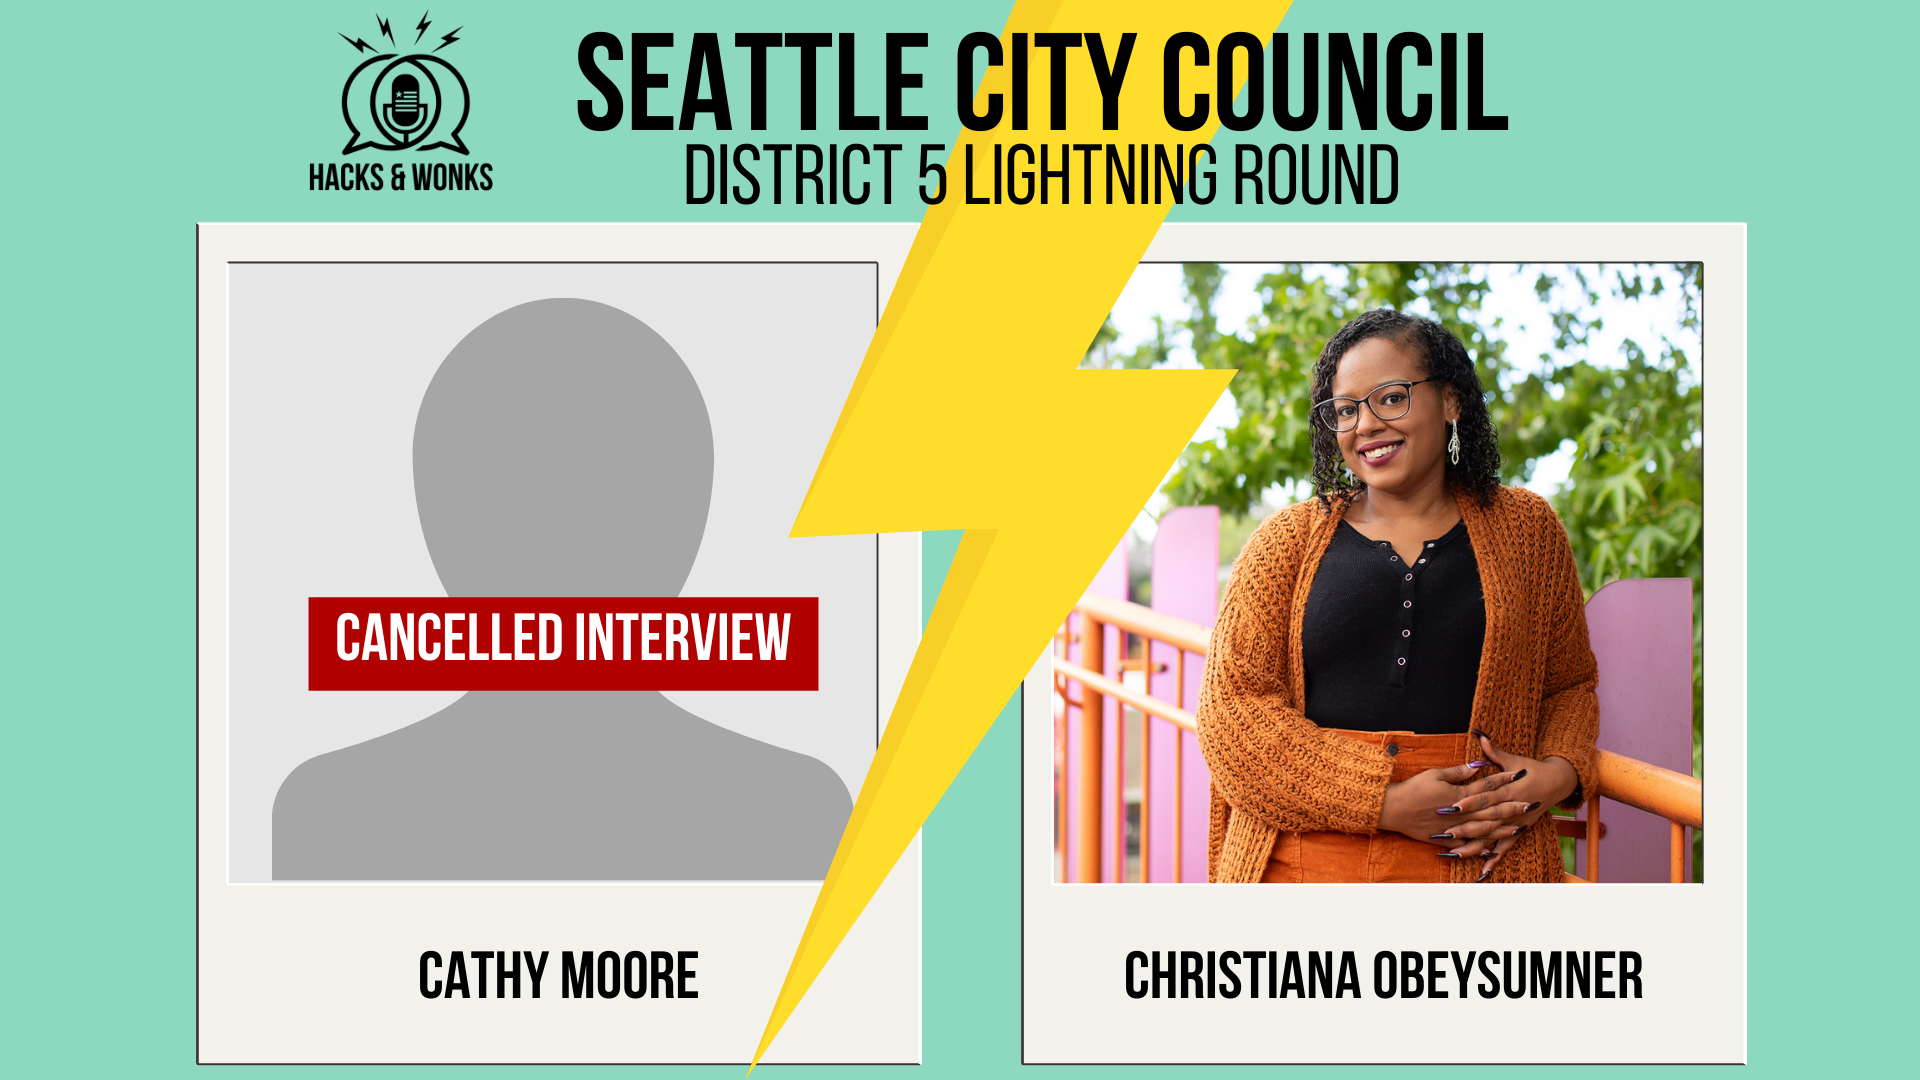 Hacks & Wonks Seattle City Council District 5 Lightning Round  Lightning bolt divides District 5 candidates: Cathy Moore (placeholder image with “Cancelled Interview” across it) and ChrisTiana ObeySumner (campaign photo)